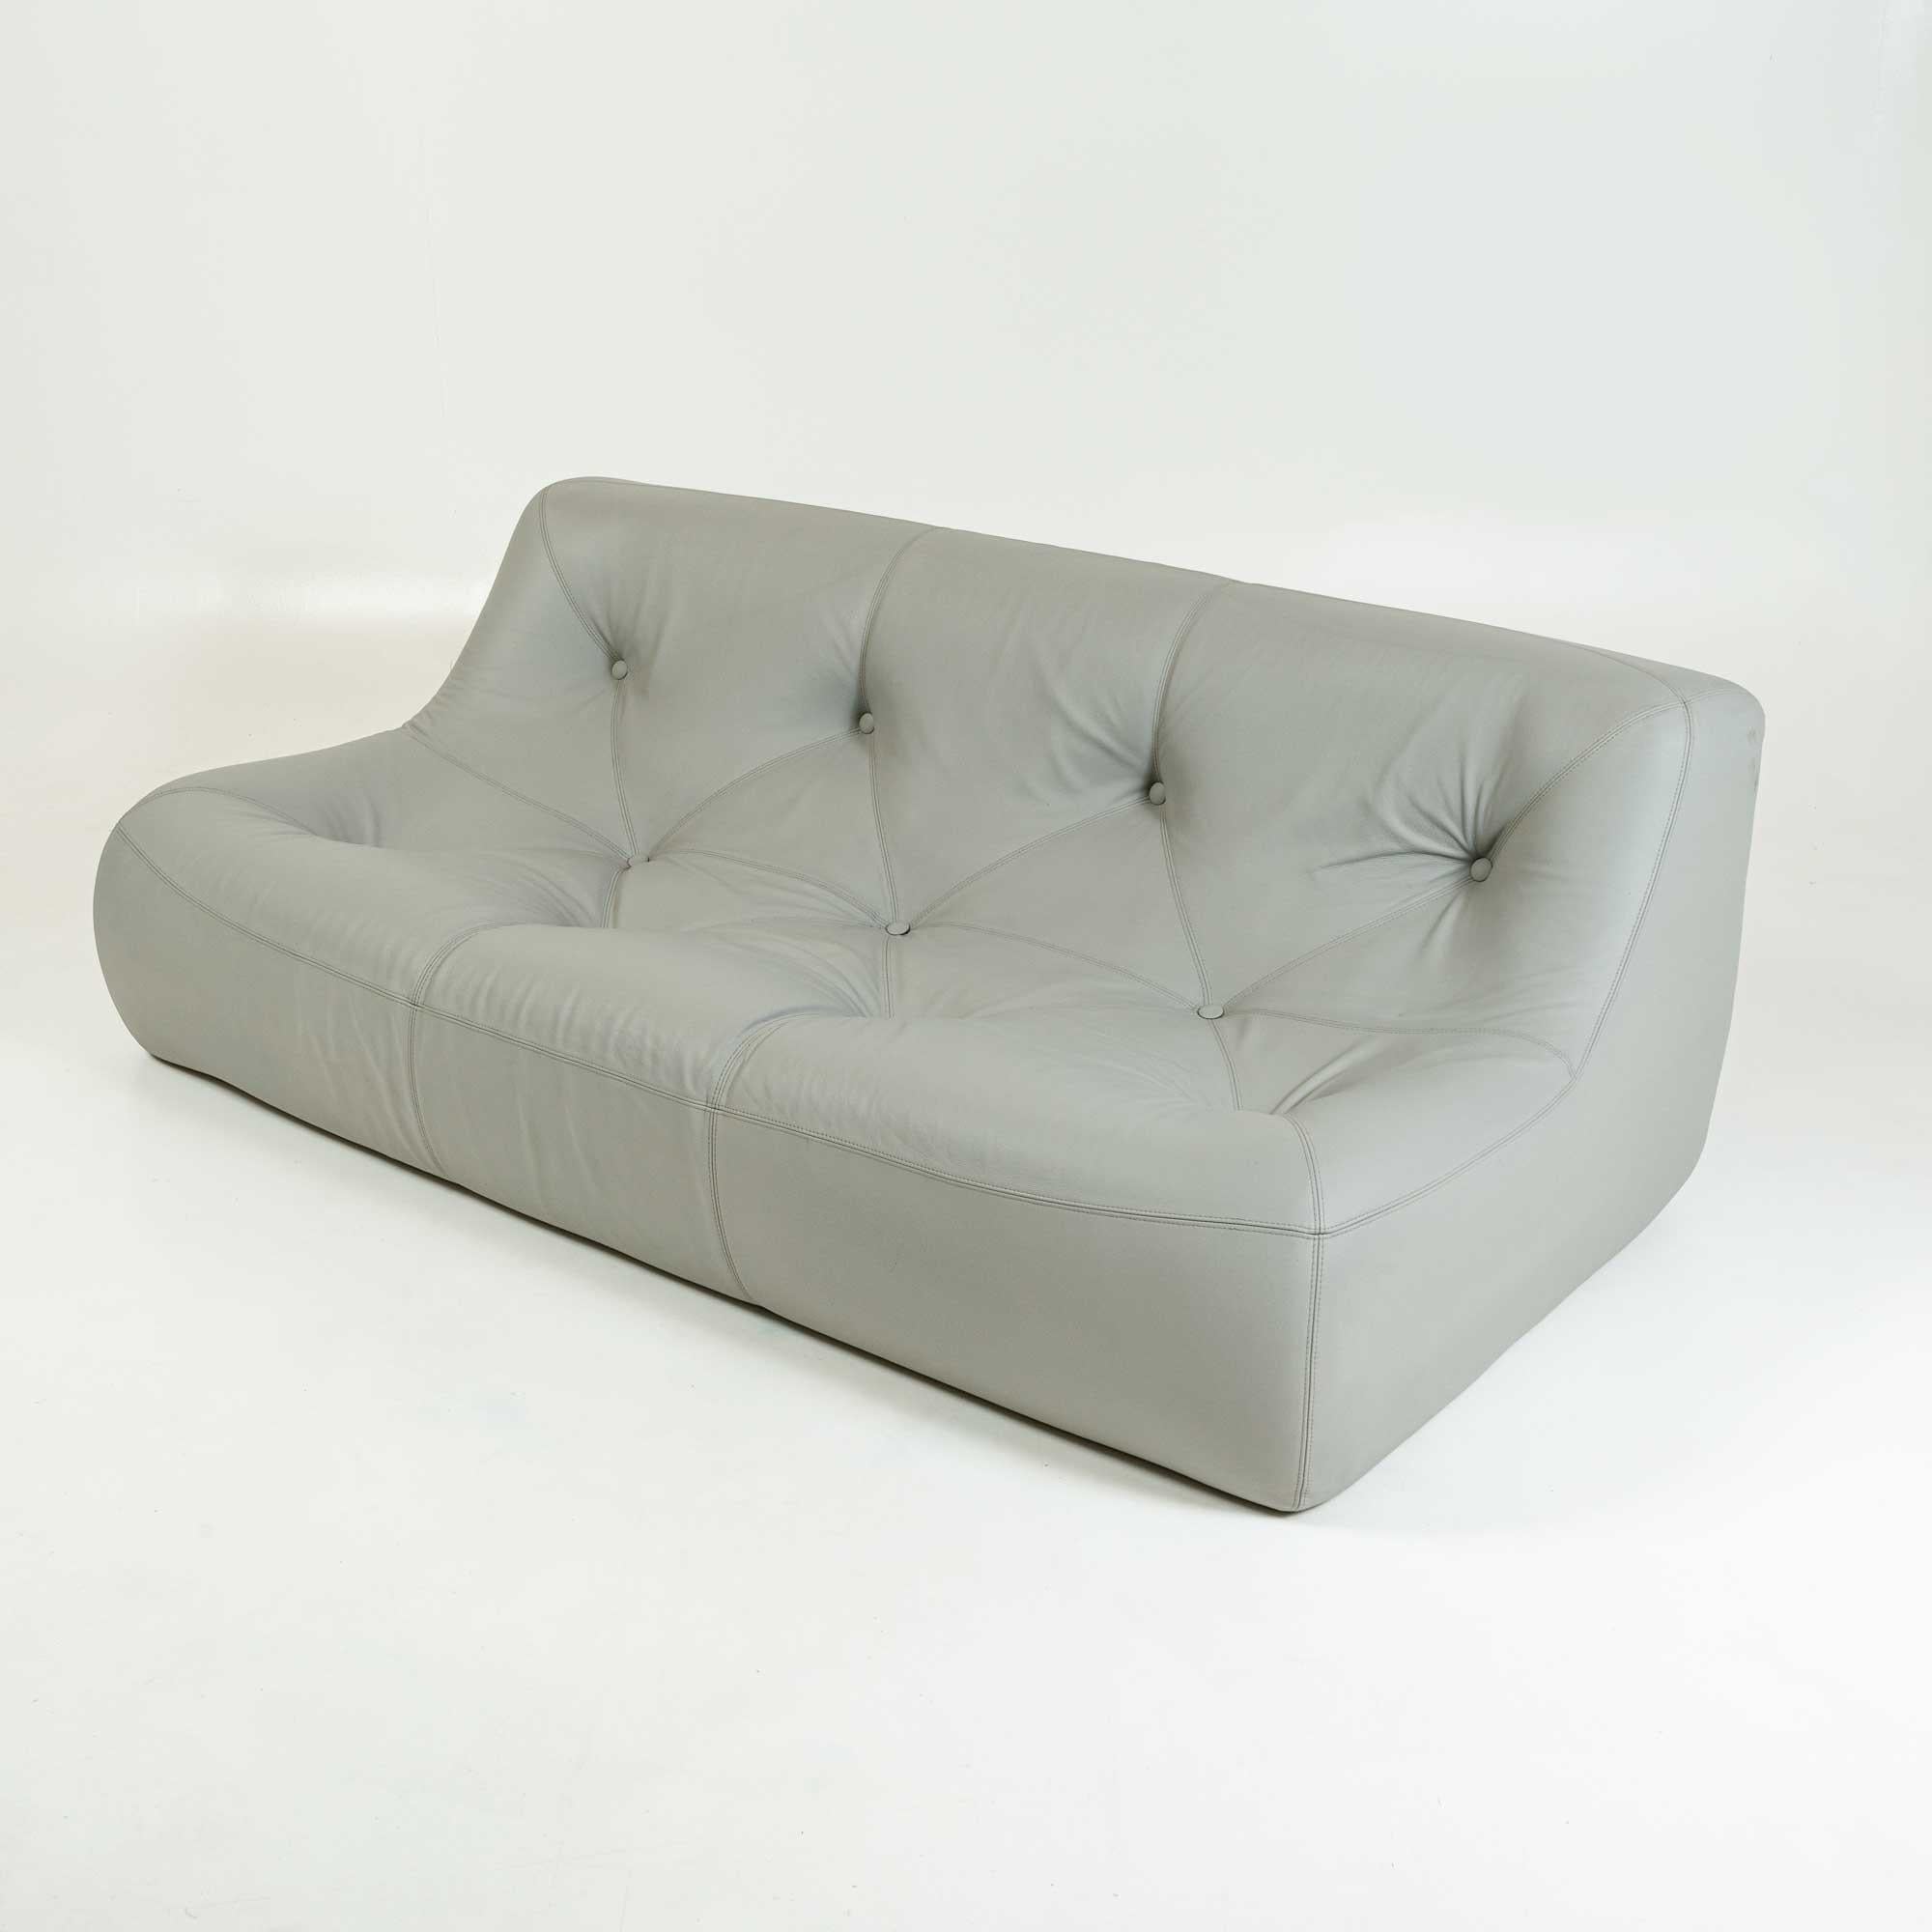 French Ligne Roset Kali Three Seater Sofa in Grey Leather, 1990s